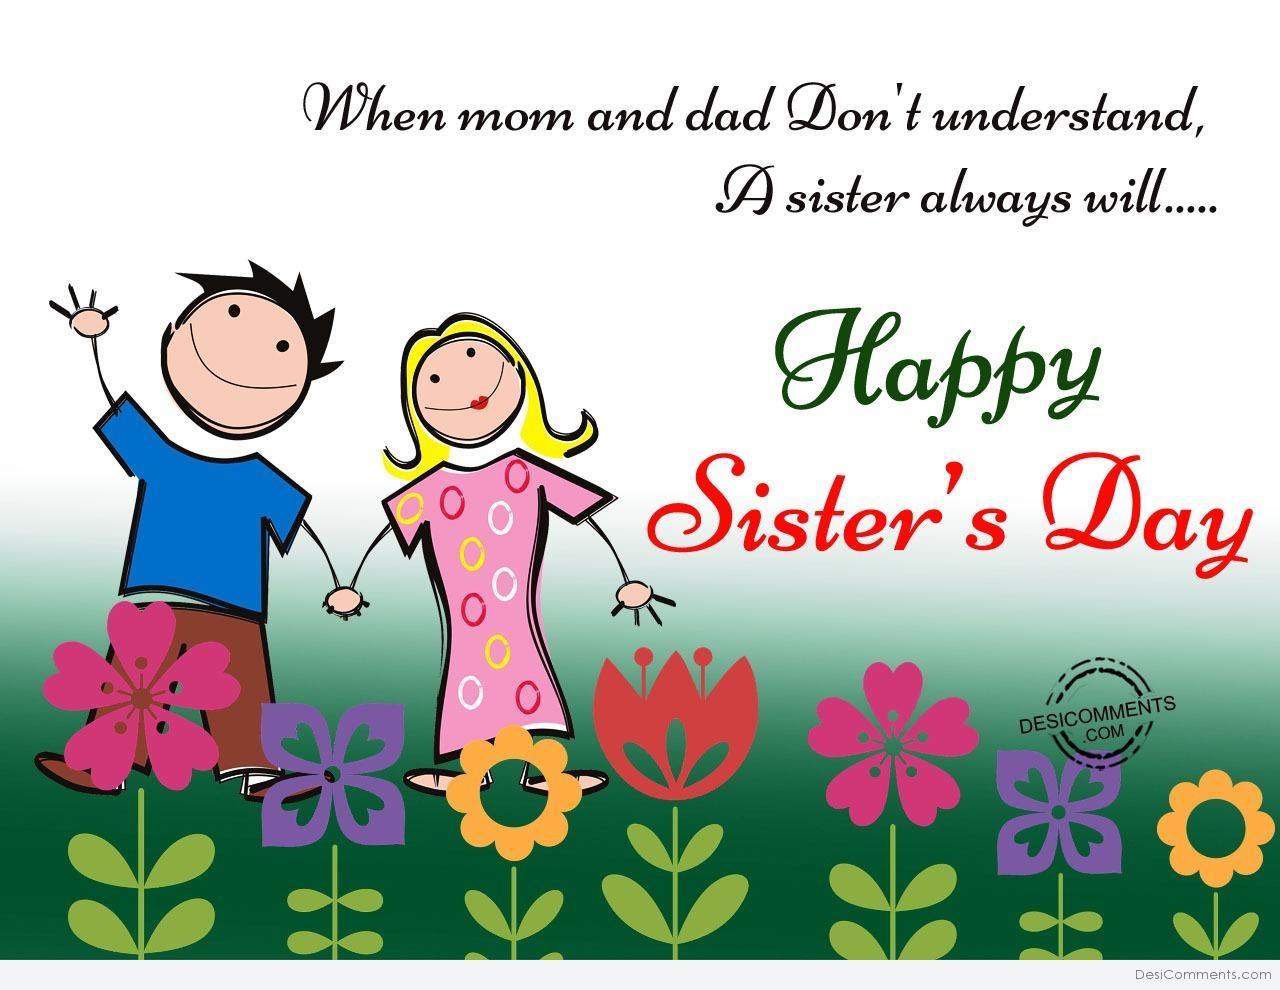 Sister’s Day Pictures, Images, Graphics for Facebook, Whatsapp